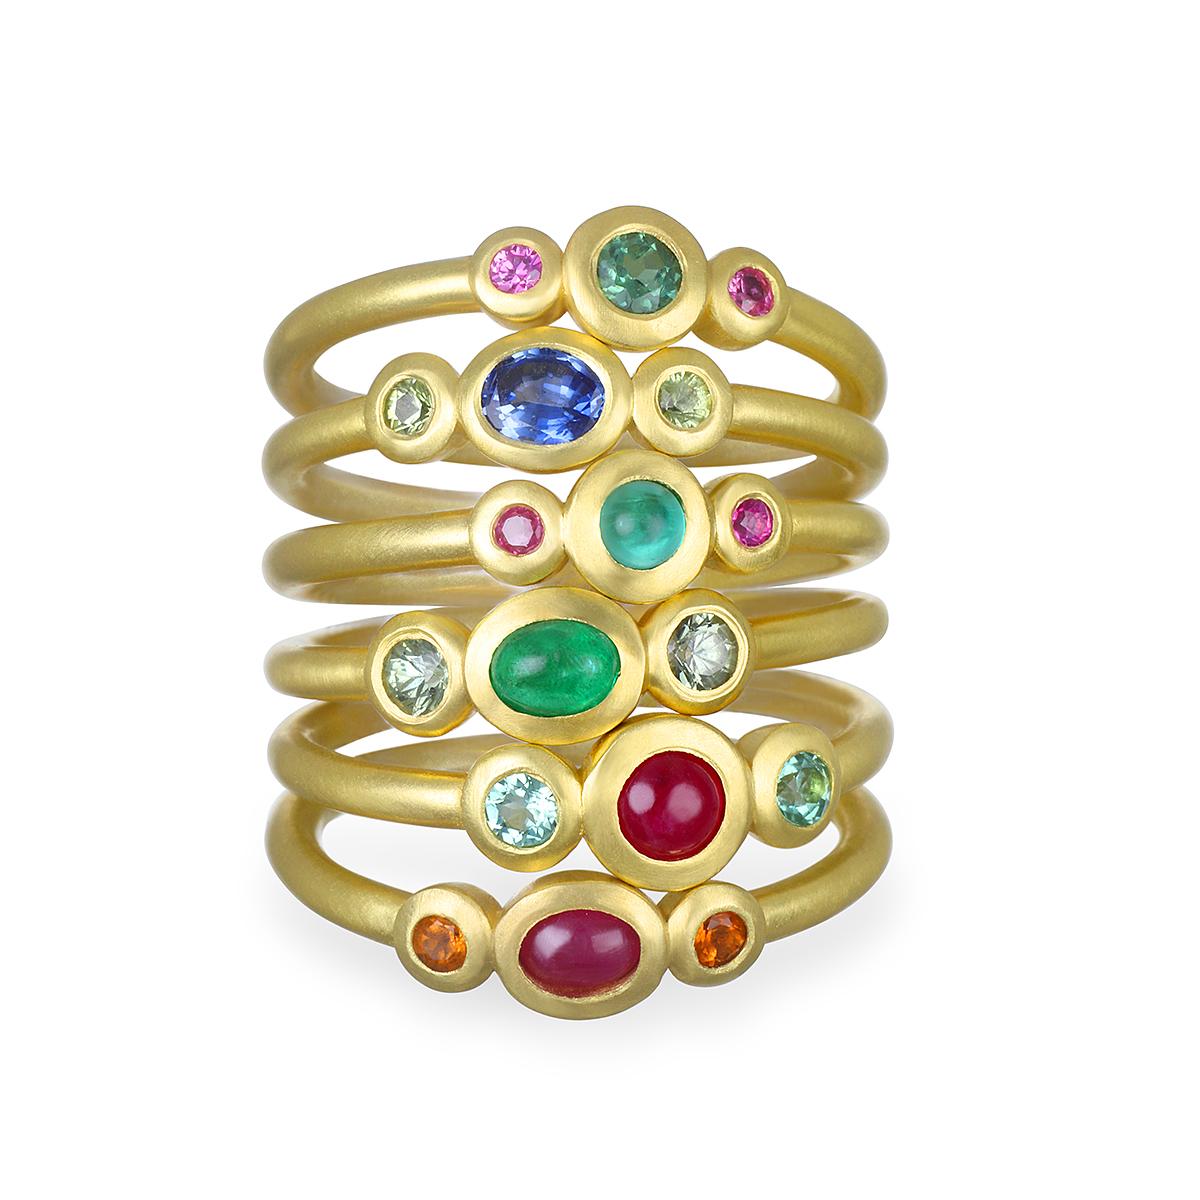 A vibrant round ruby flanked by sparkling blue/green tourmalines. This three stone ring is beautifully crafted, bezel set and matte-finished. Wear alone or stacked with other rings to elevate your individual style!  Handcrafted in 18k green gold,